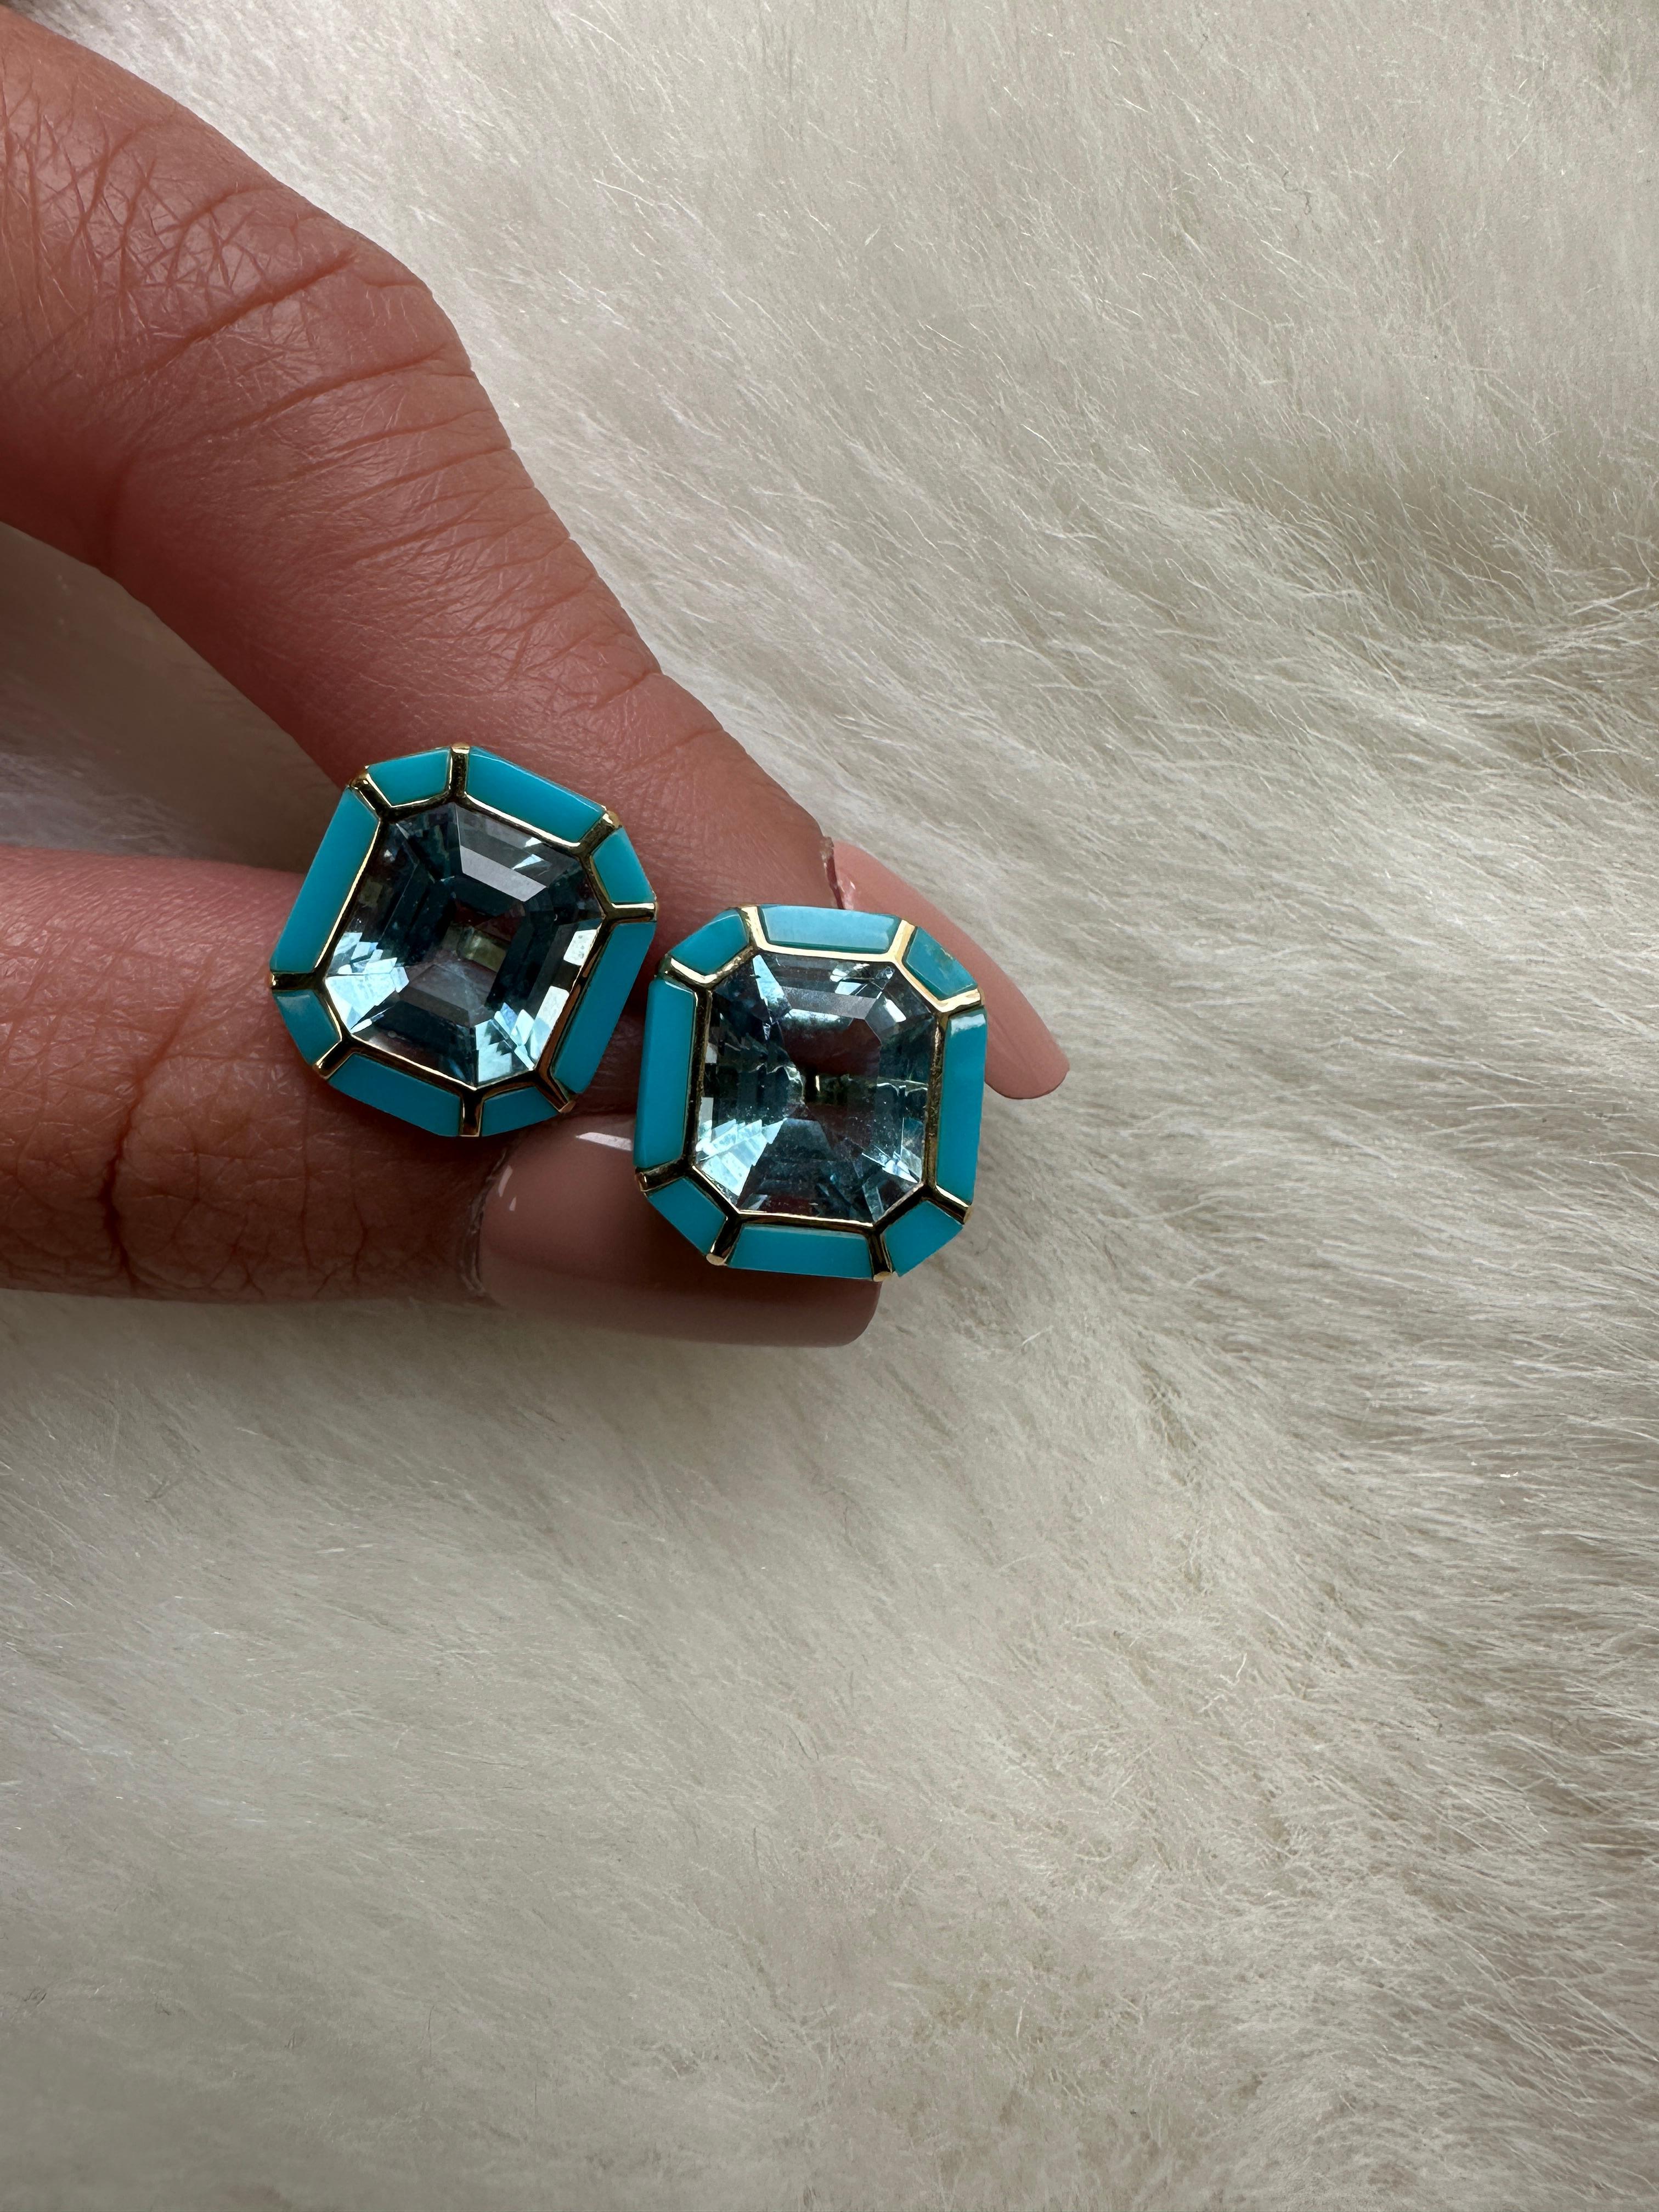 The Blue Topaz & Turquoise Stud Earrings from the 'Melange' Collection showcase a captivating blend of elegance and charm. Crafted with exquisite attention to detail, these earrings feature stunning emerald cut Blue Topaz and Turquoise gemstones set